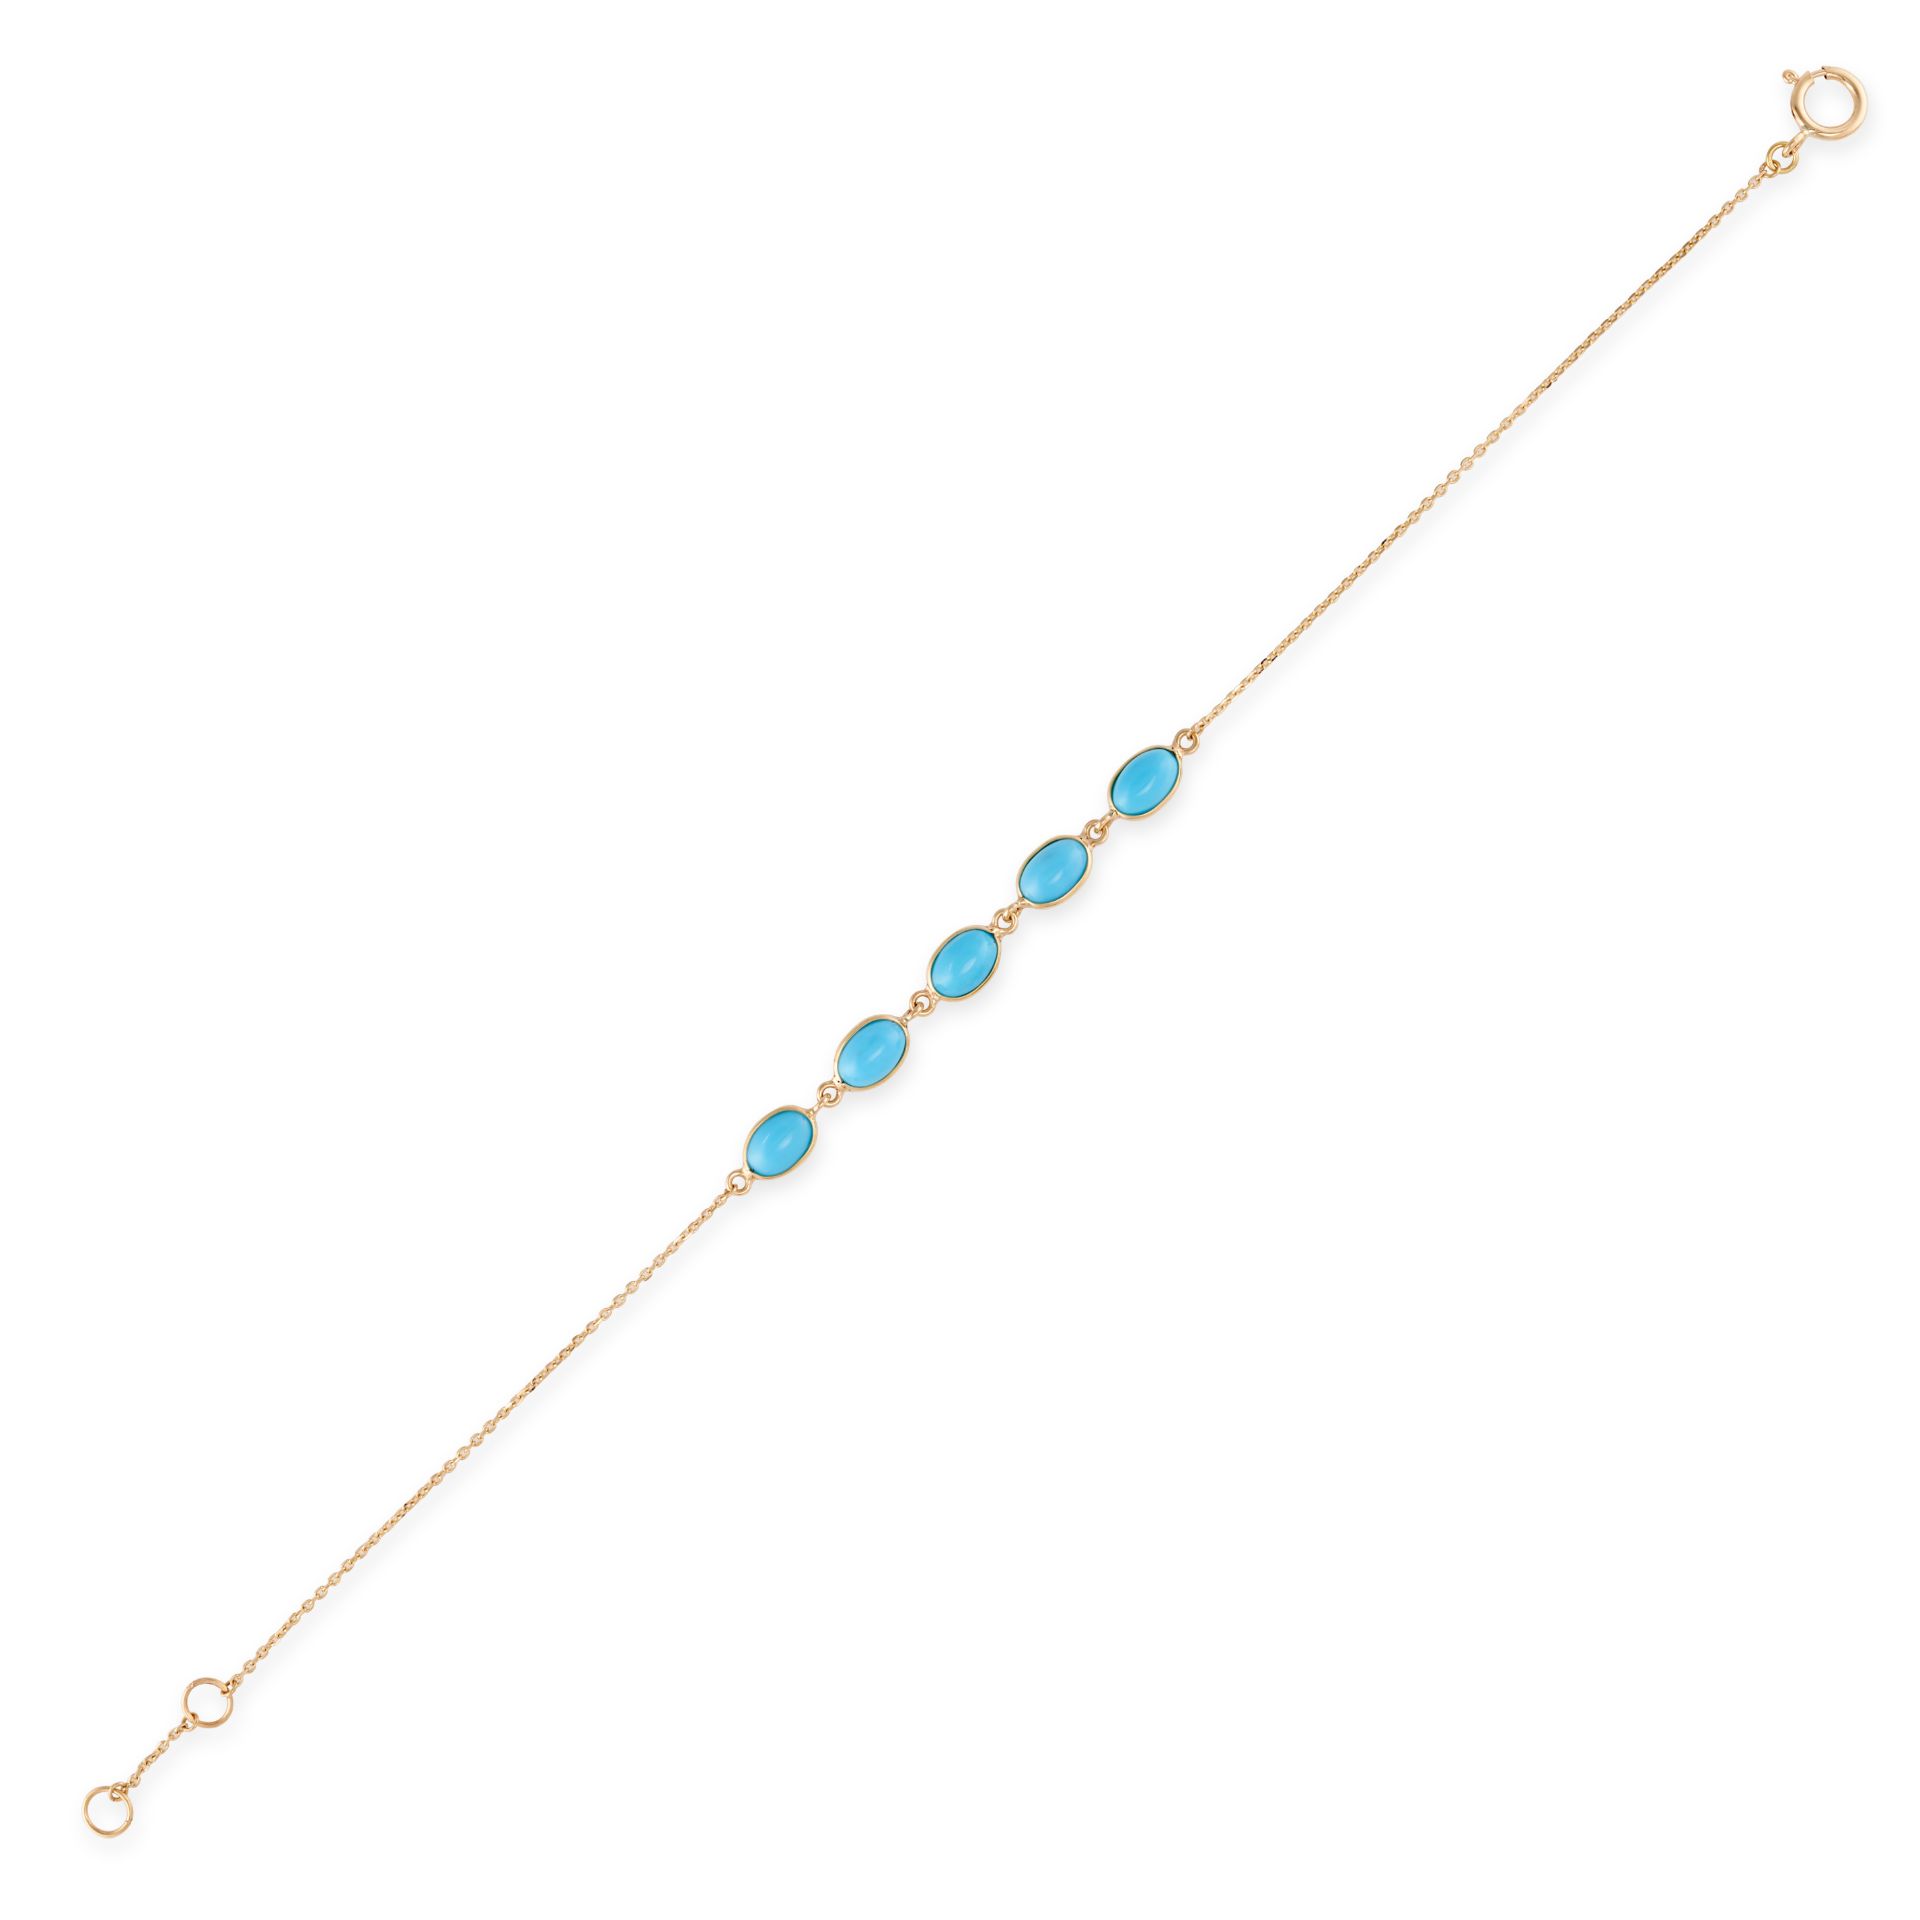 A RECONSTITUTED TURQUOISE BRACELET comprising a trace chain set with five oval cabochon reconstit...